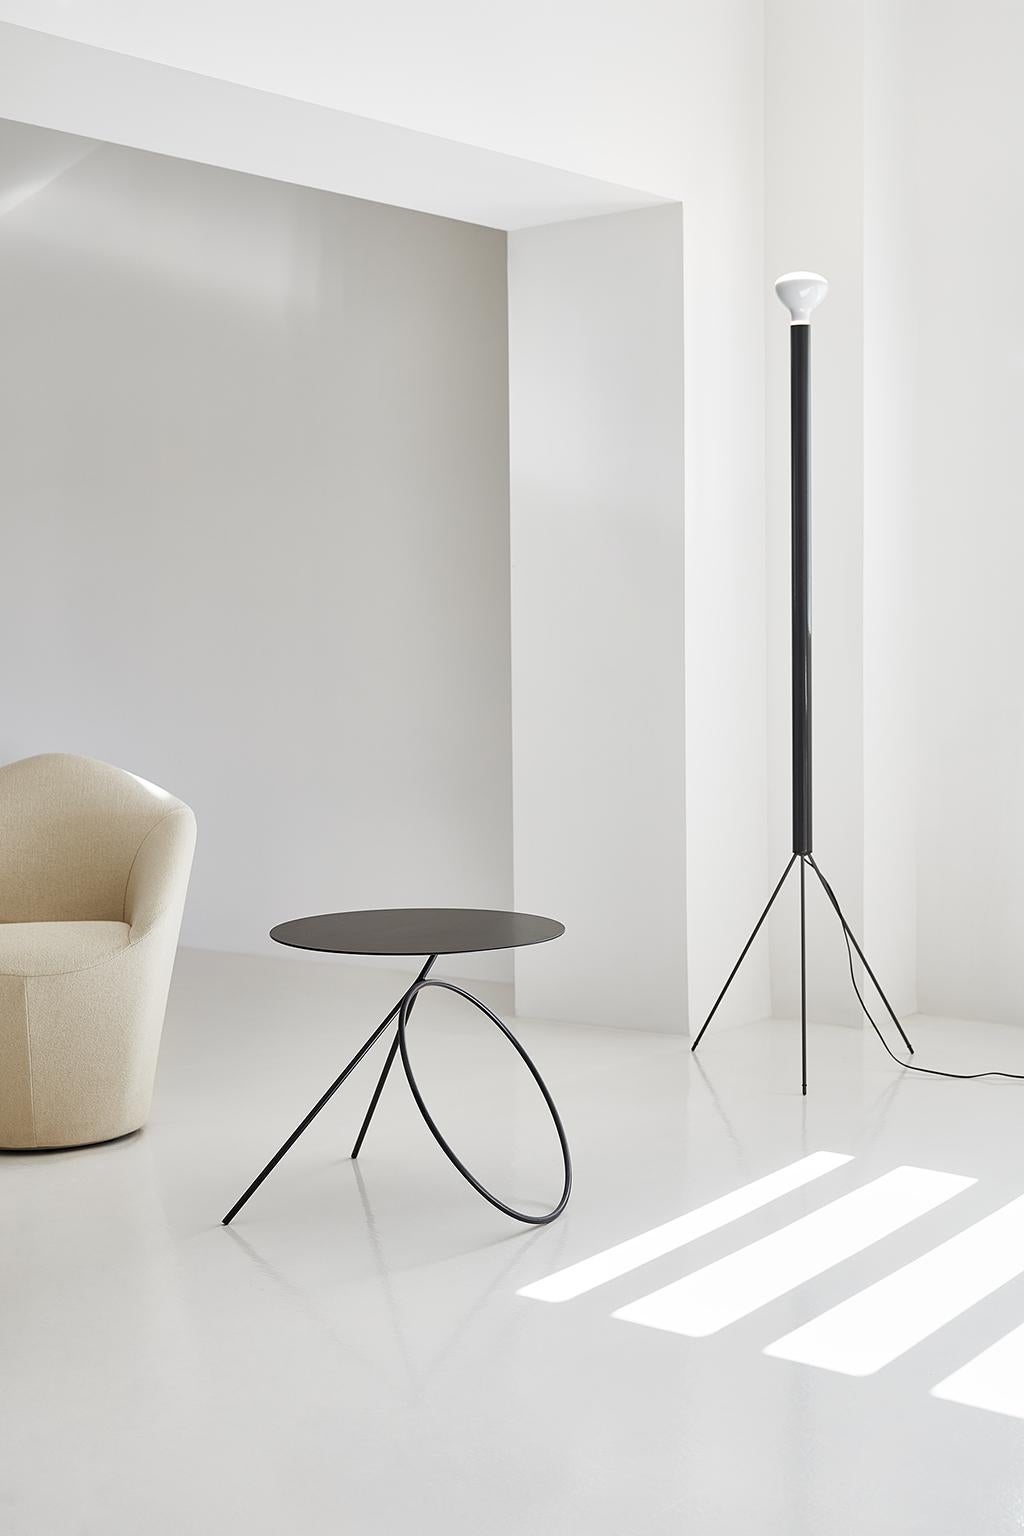 Minimalist Viccarbe Bamba Side or Coffee Table, Black Finish by Pedro Paulo Venzón For Sale